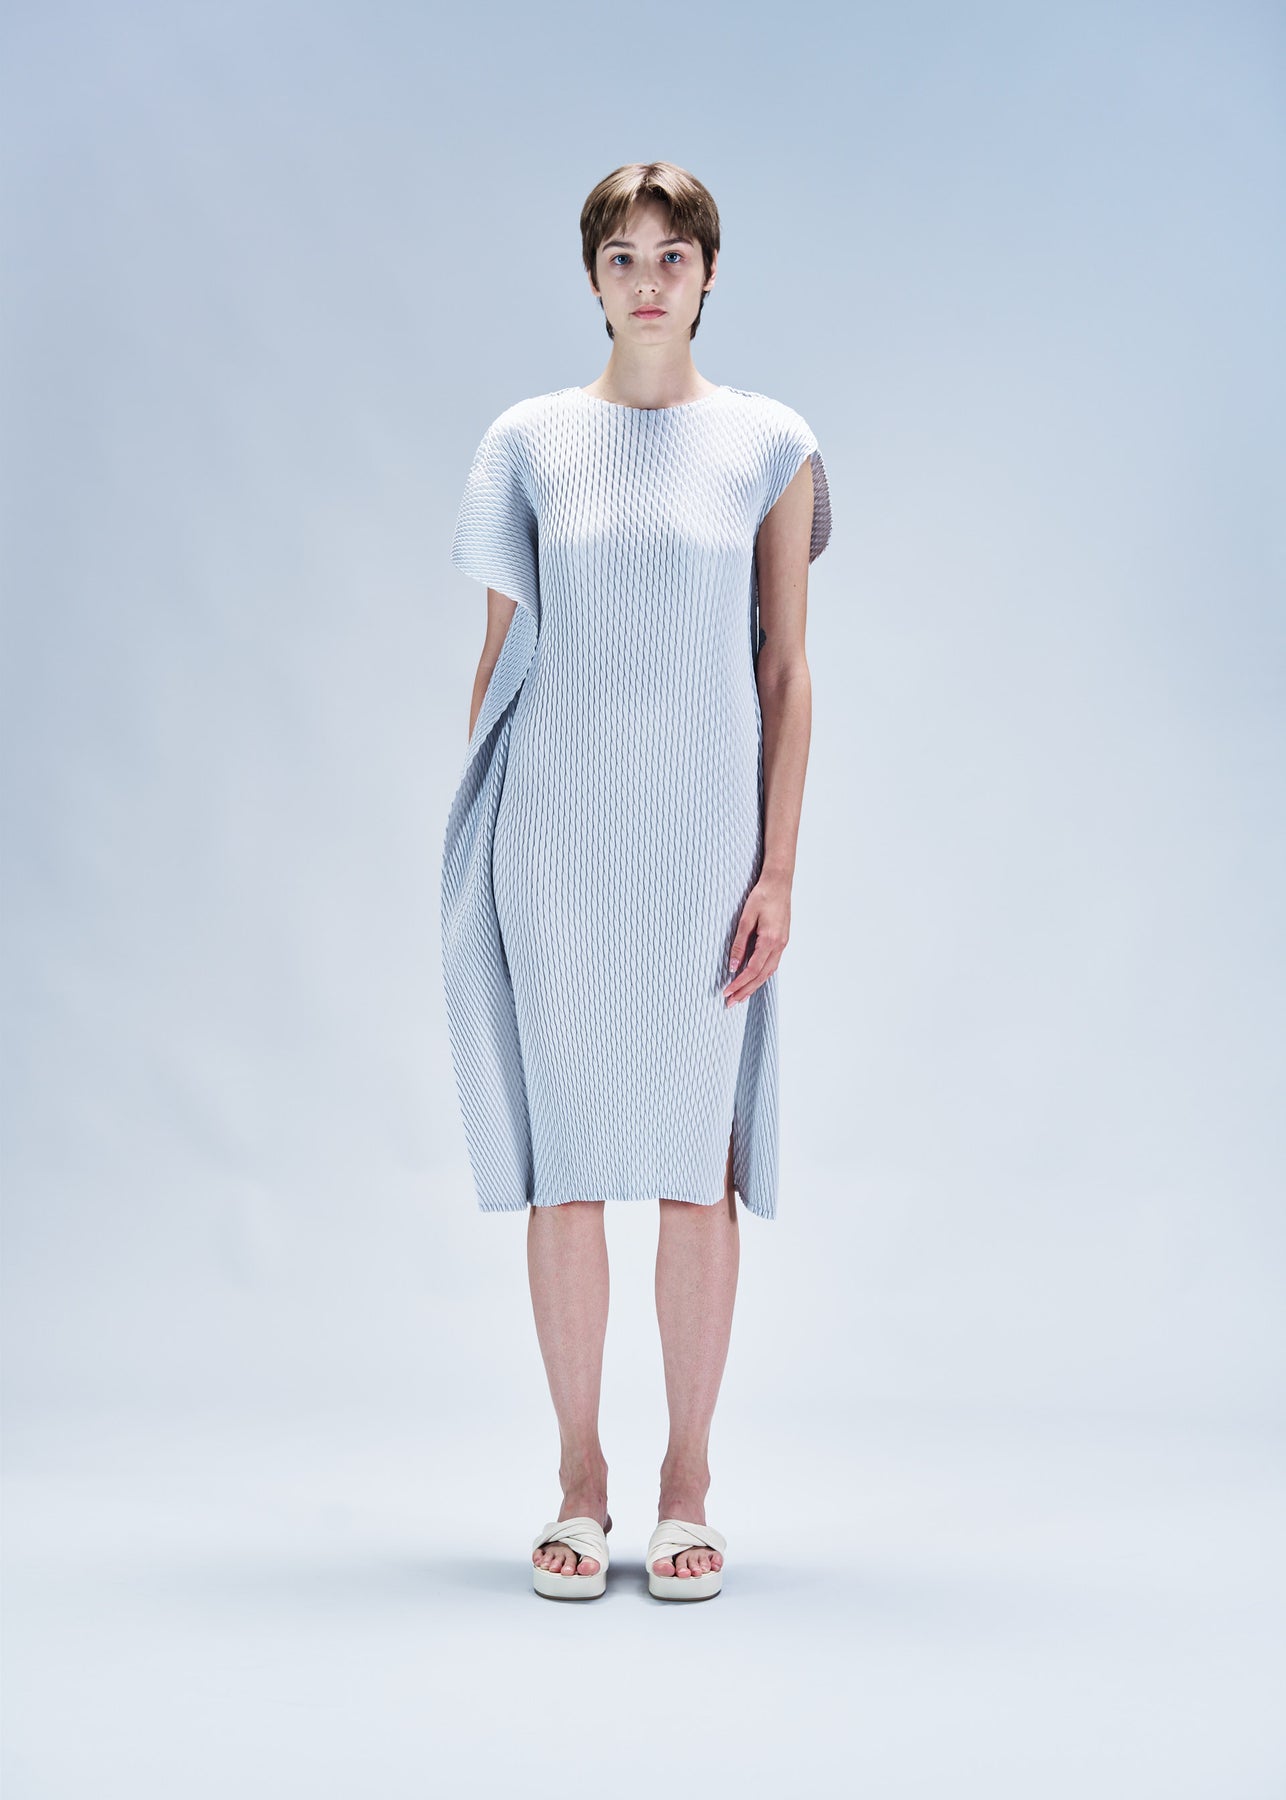 SLEEK PLEATS DRESS | The official ISSEY MIYAKE ONLINE STORE 